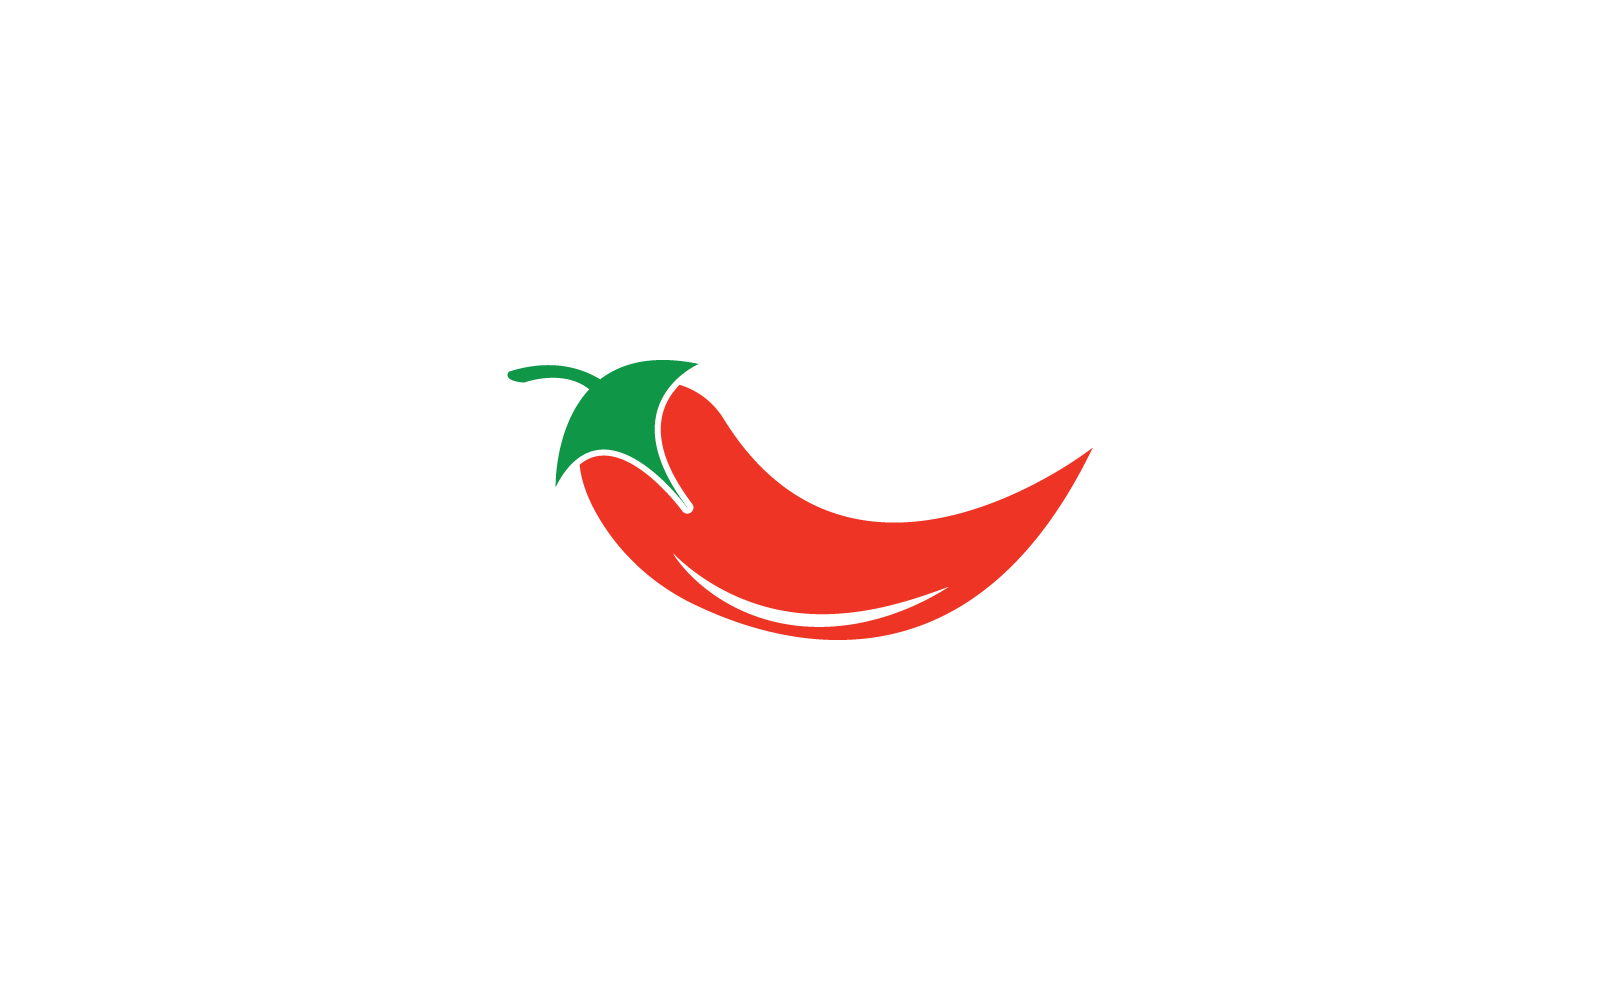 Red Chili illustration logo vector template